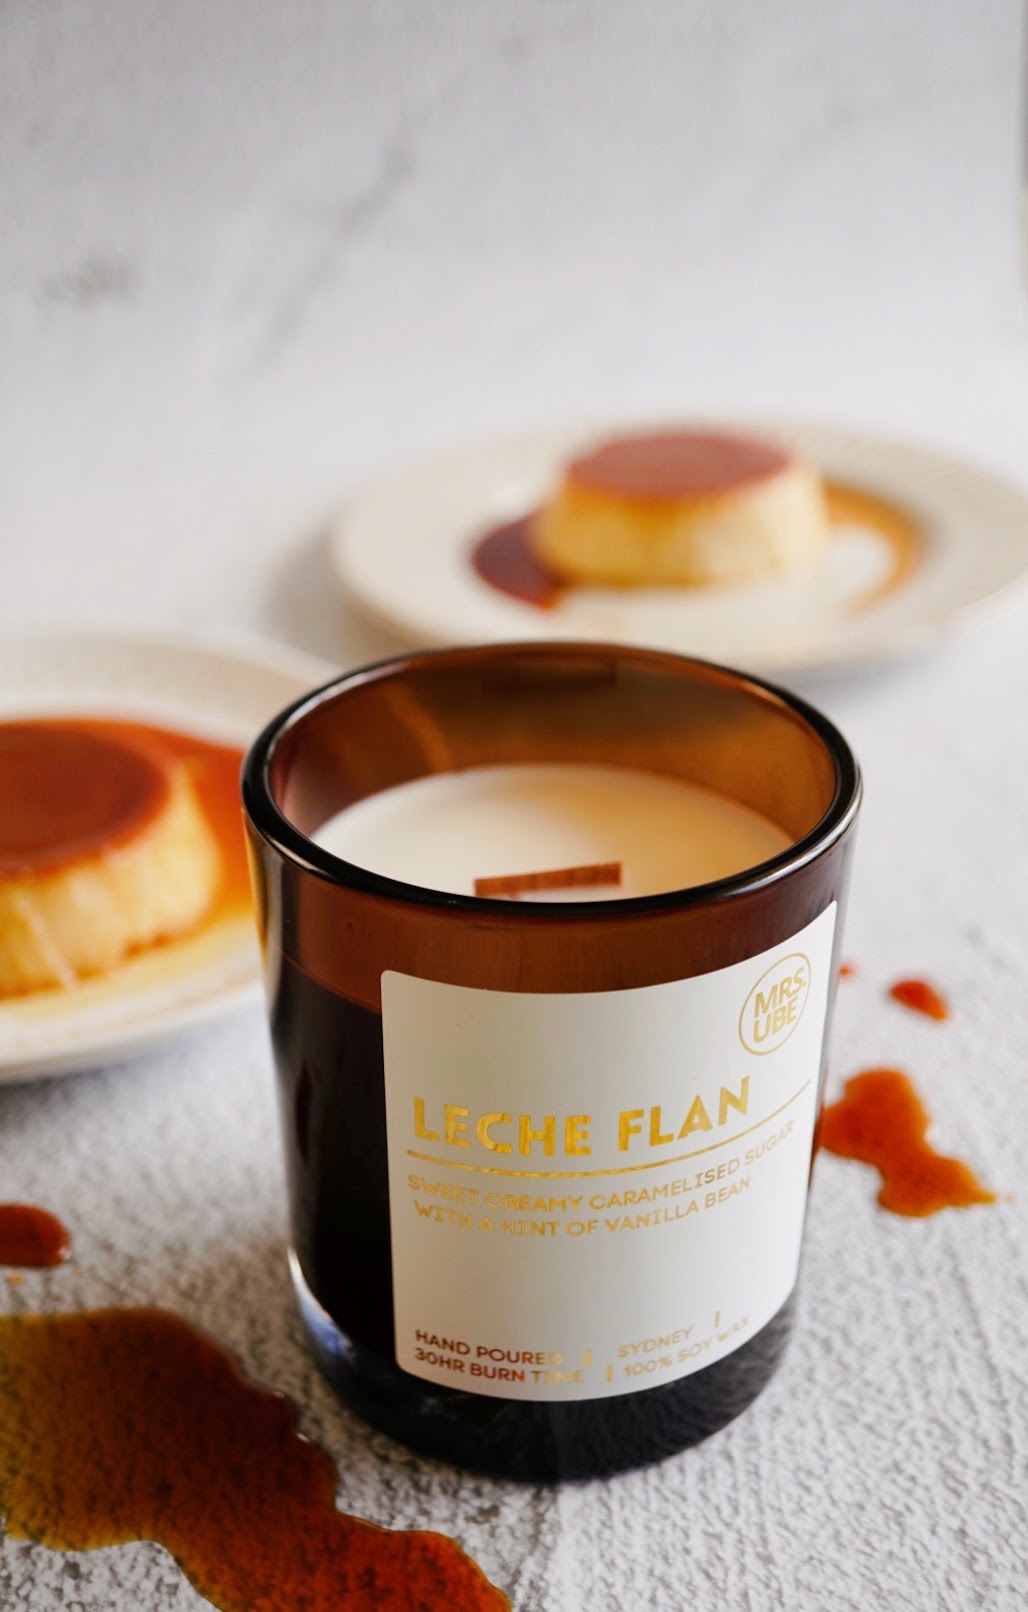 Leche Flan Candle